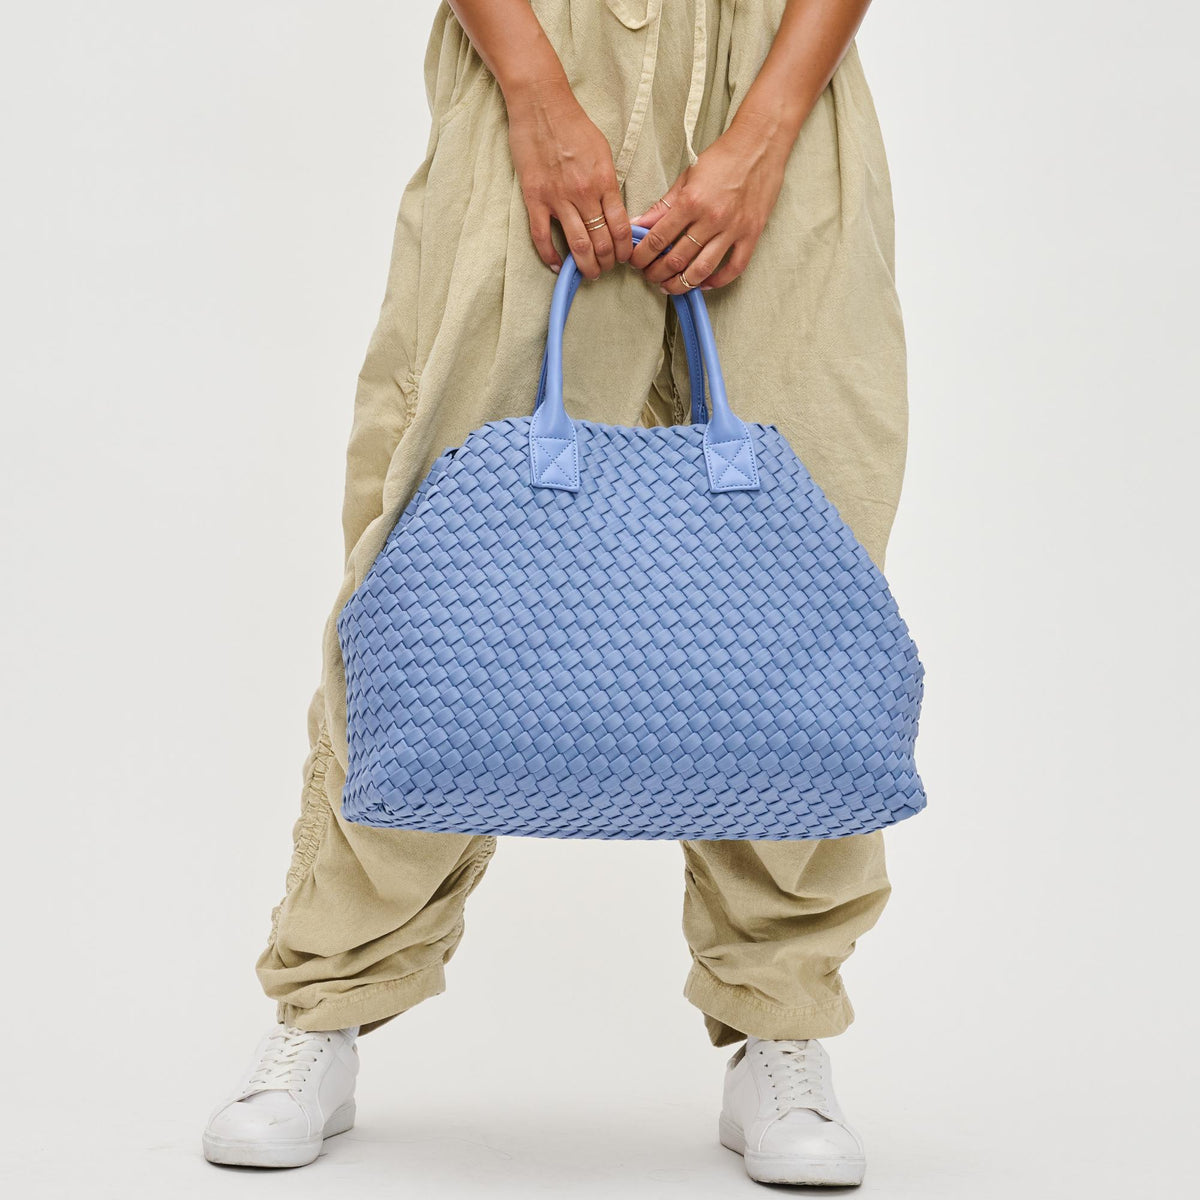 Woman wearing Periwinkle Urban Expressions Ithaca - Woven Neoprene Tote 840611128751 View 1 | Periwinkle